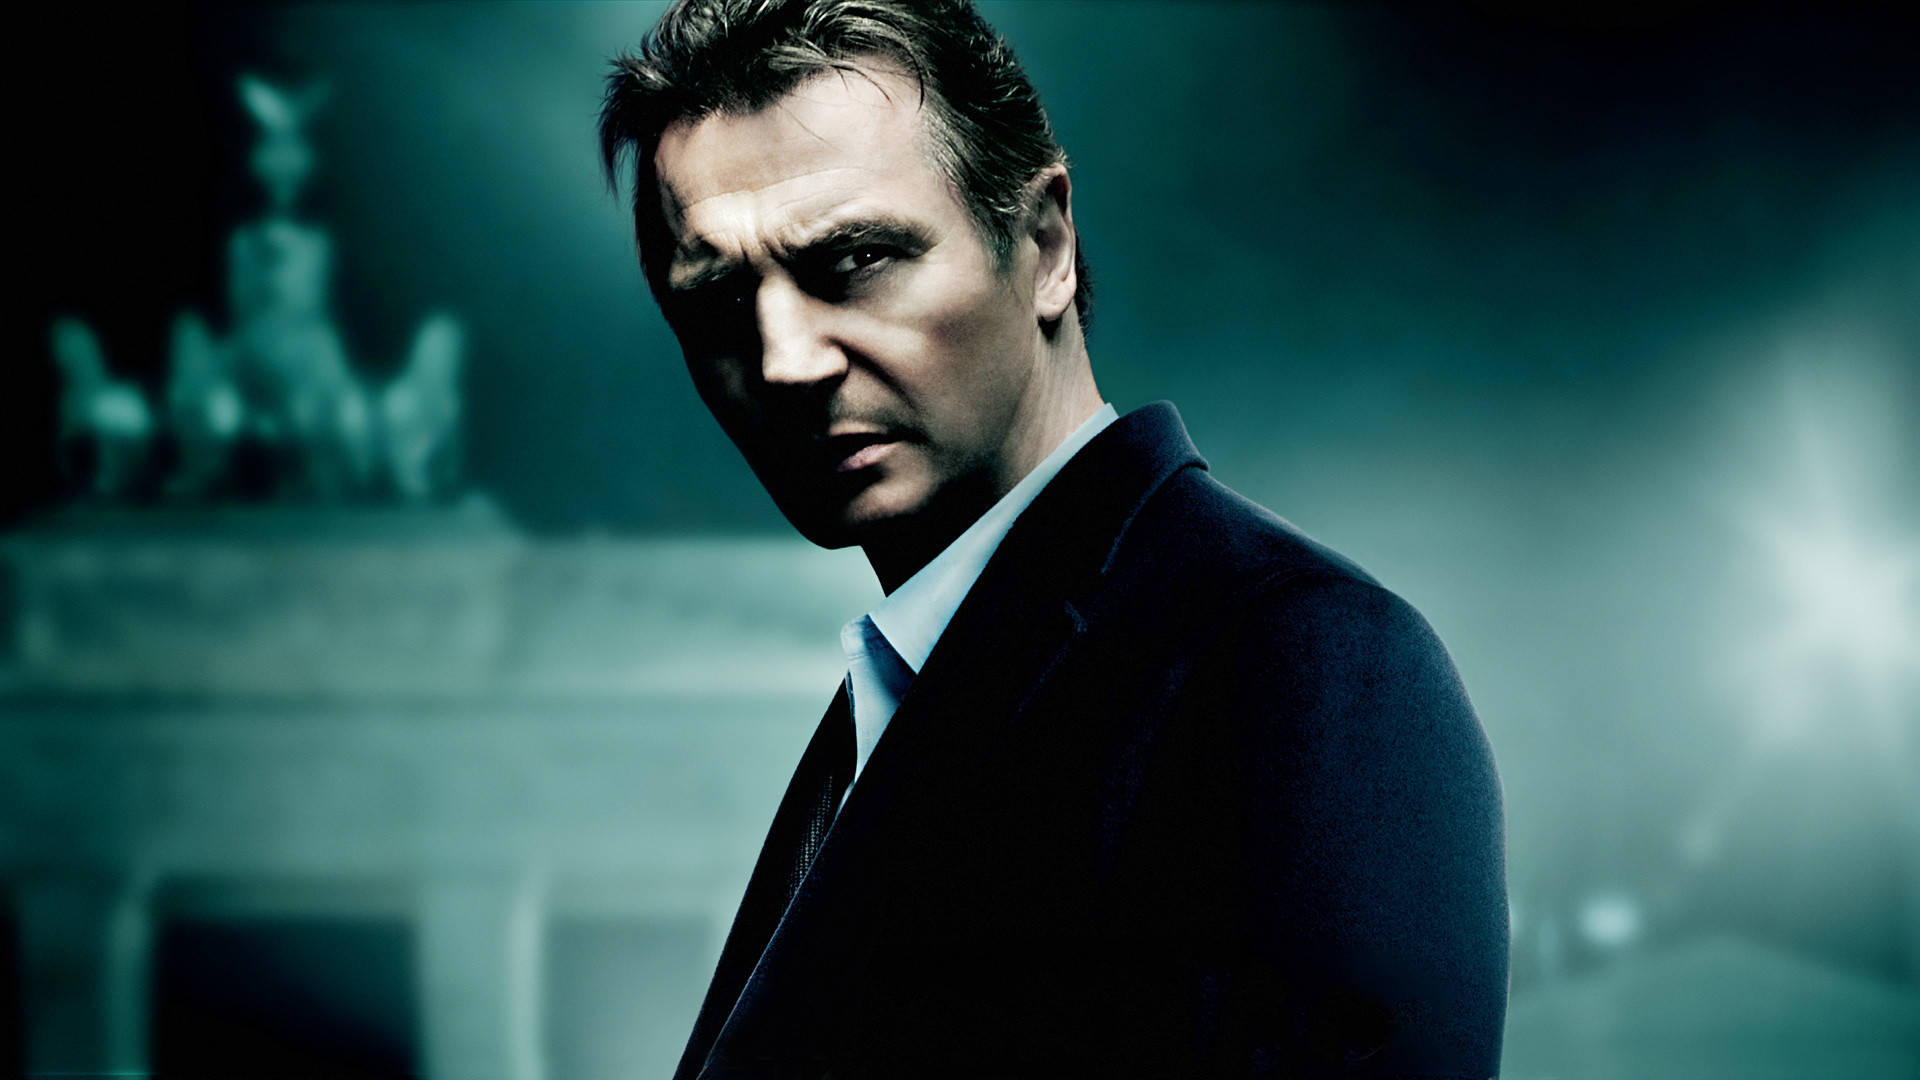 Top 999+ Liam Neeson Wallpapers Full HD, 4K✅Free to Use